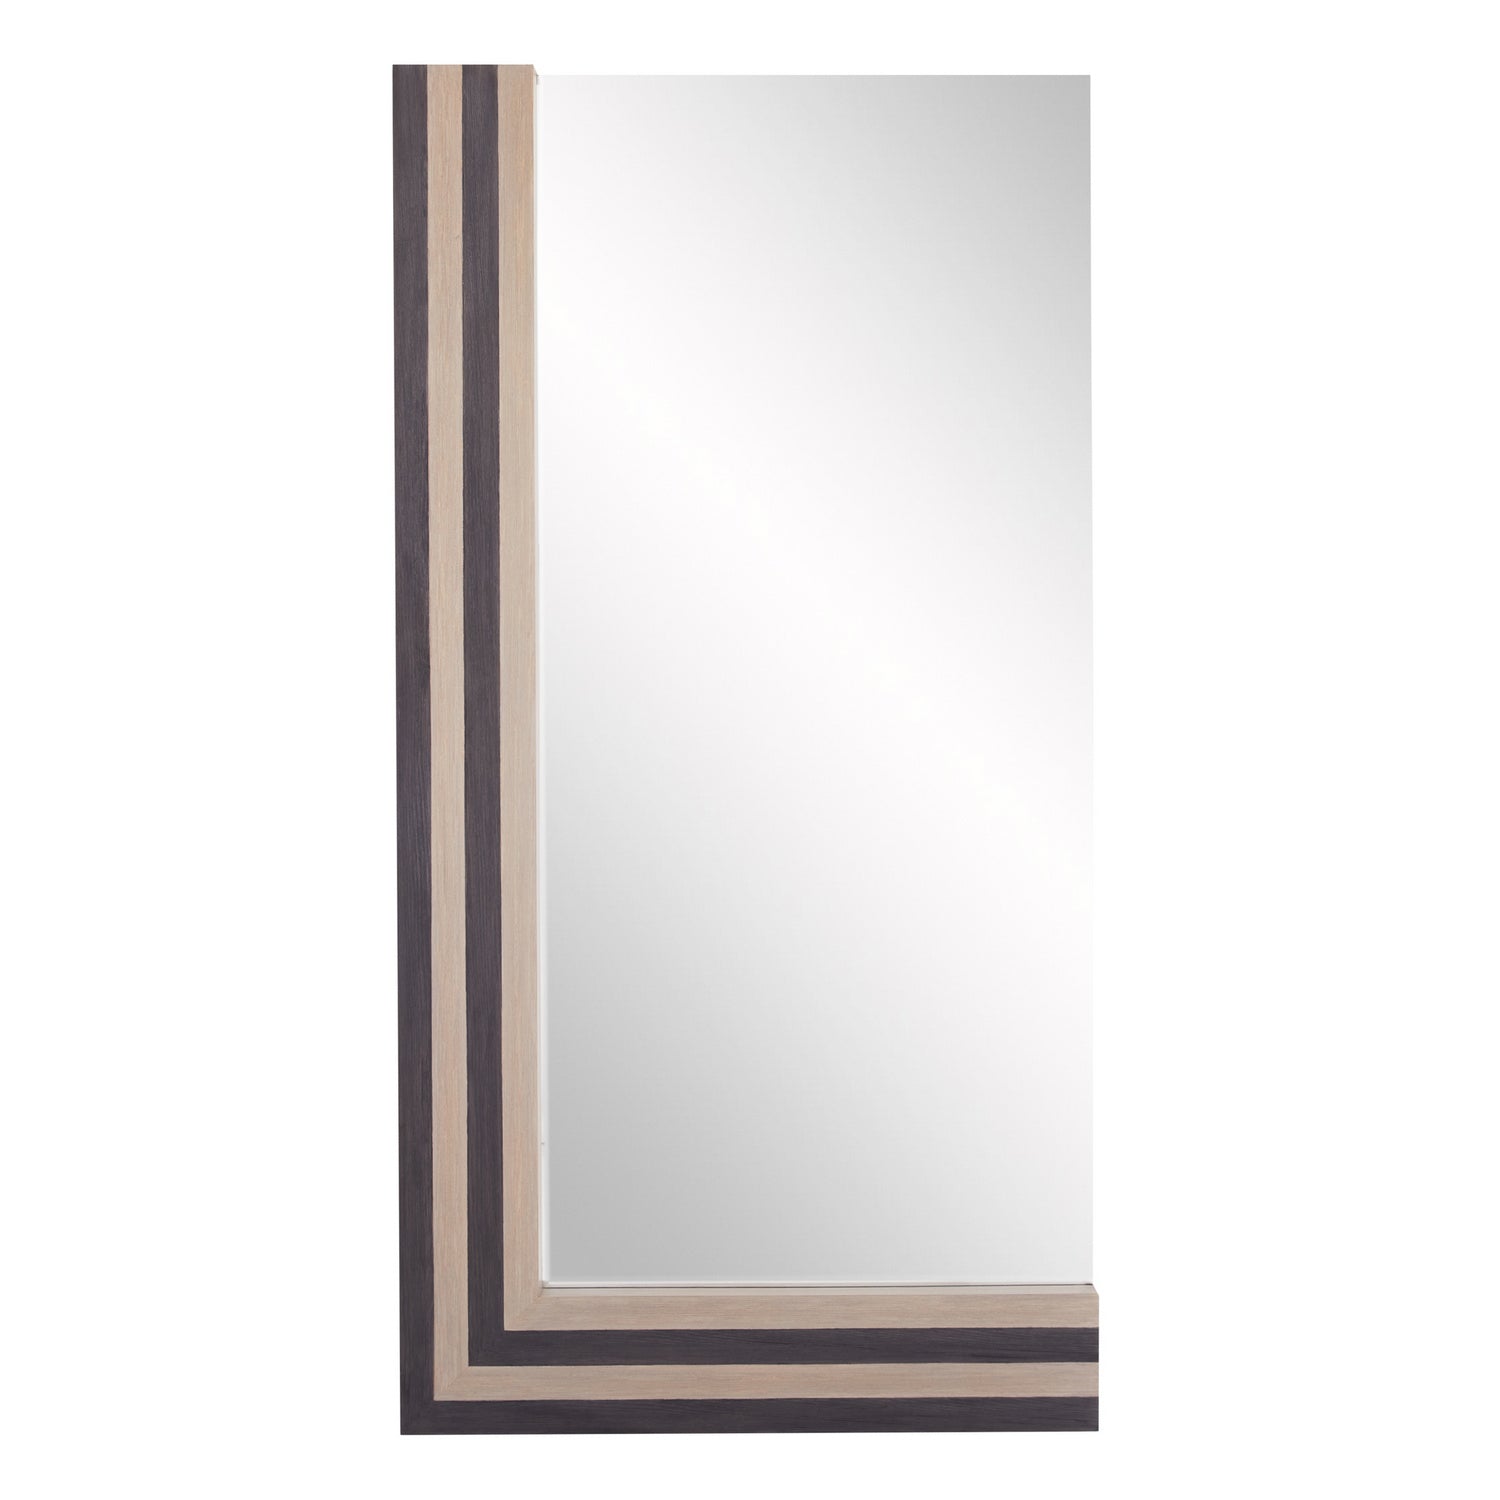 Floor Mirror from the Roxy collection in Ebony finish